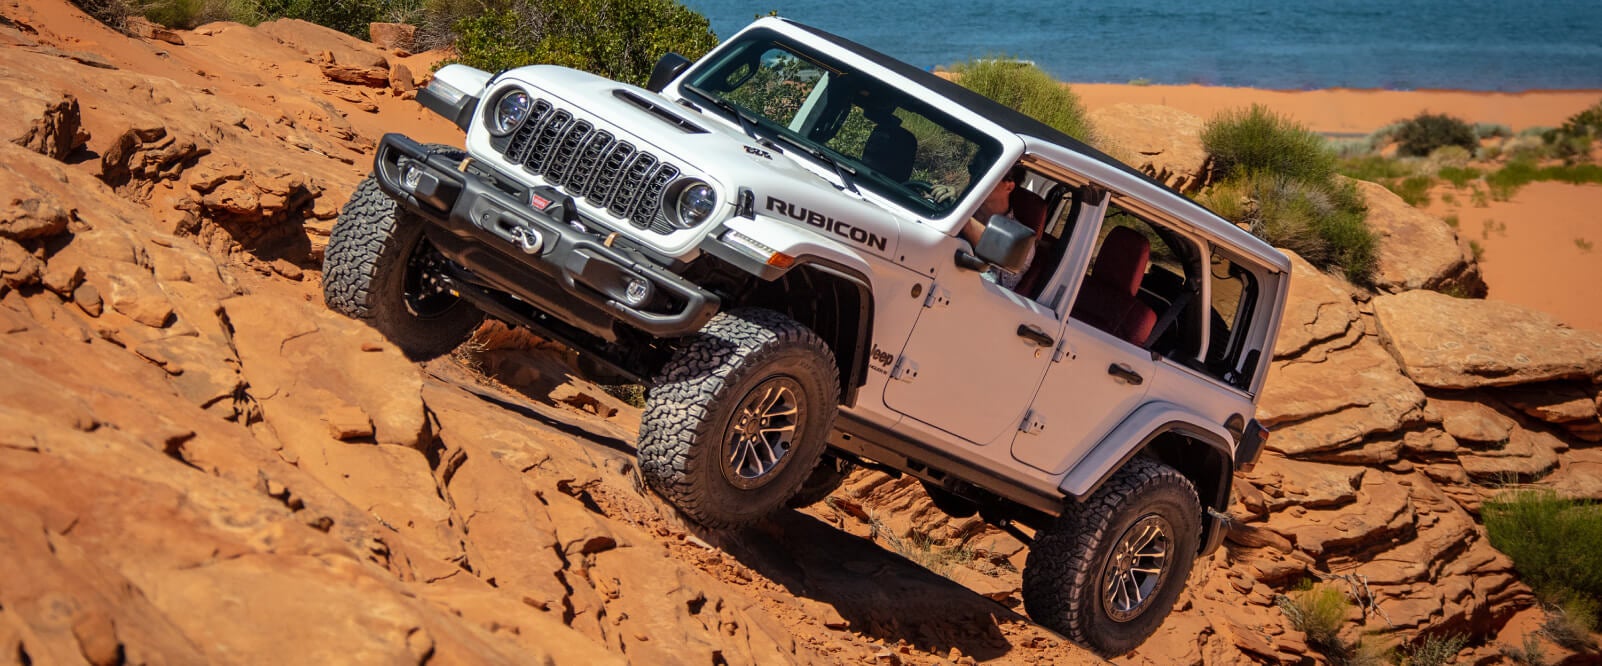 Jeep Wrangler Off-Road Performance Features